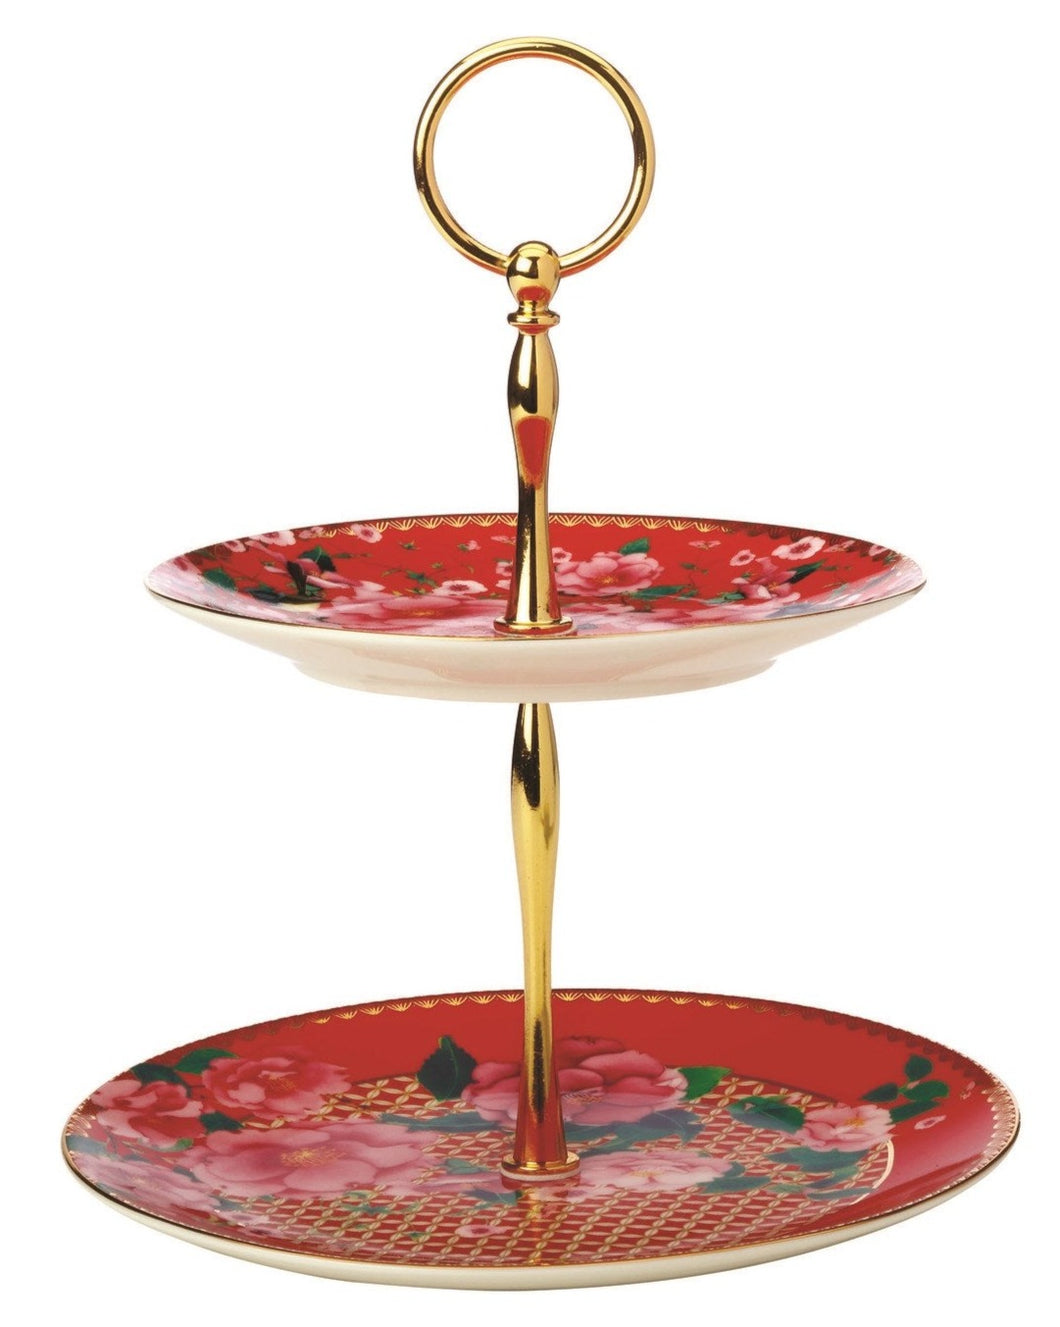 Maxwell & Williams 2 Tier Porcelain Cake Stand - Red